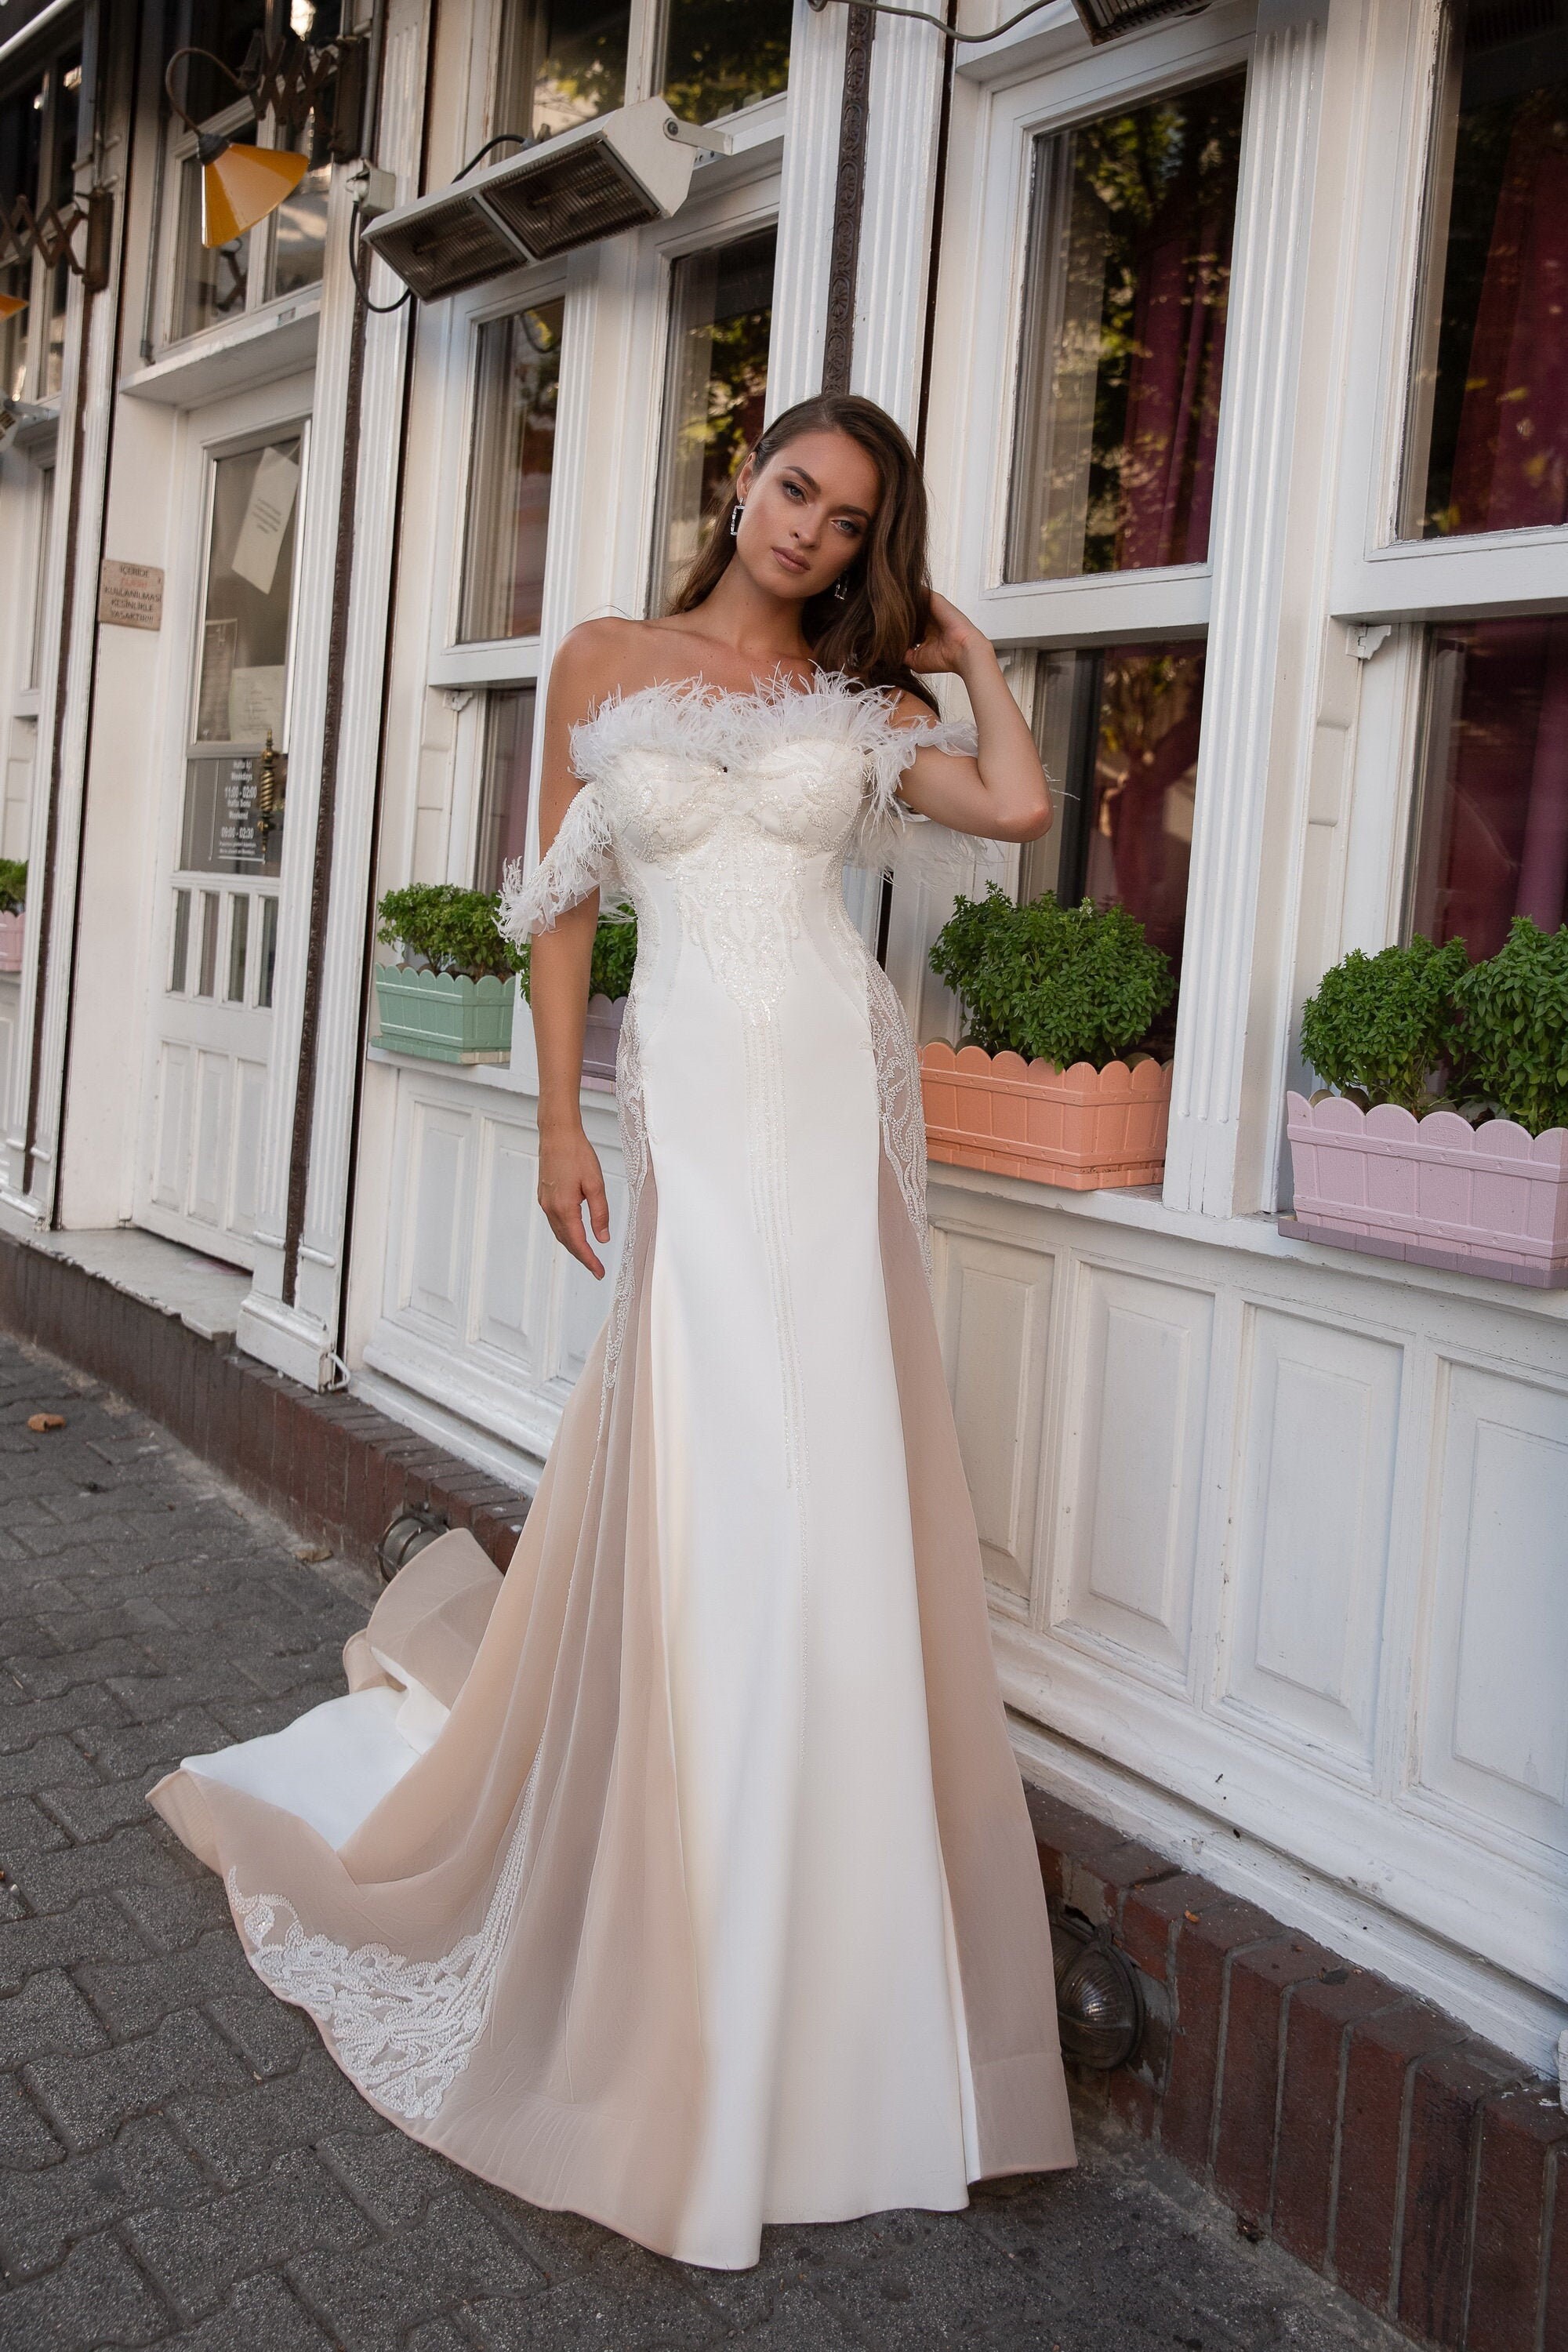 Great Gatsby Wedding Dress. Unique Dress Decorated With Lace